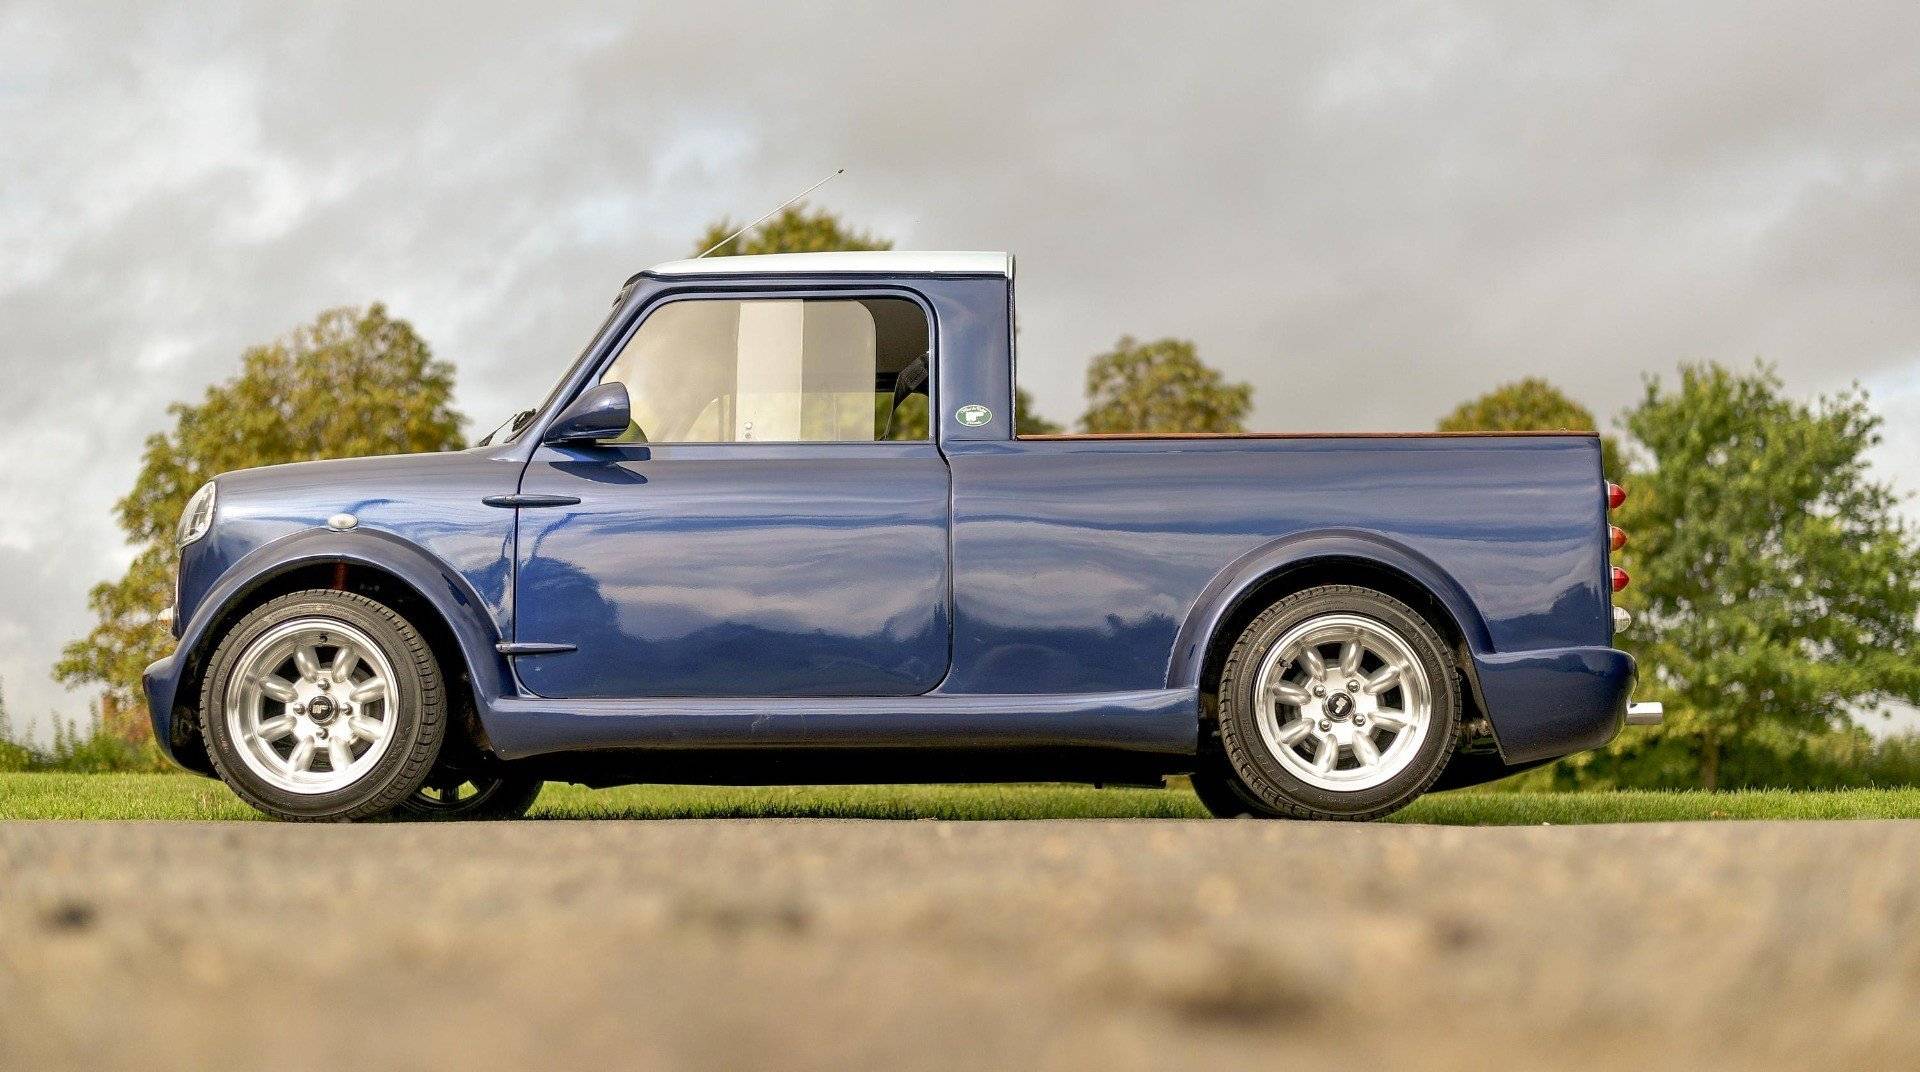 For Sale: Austin Mini Pickup (1980) offered for €19,903